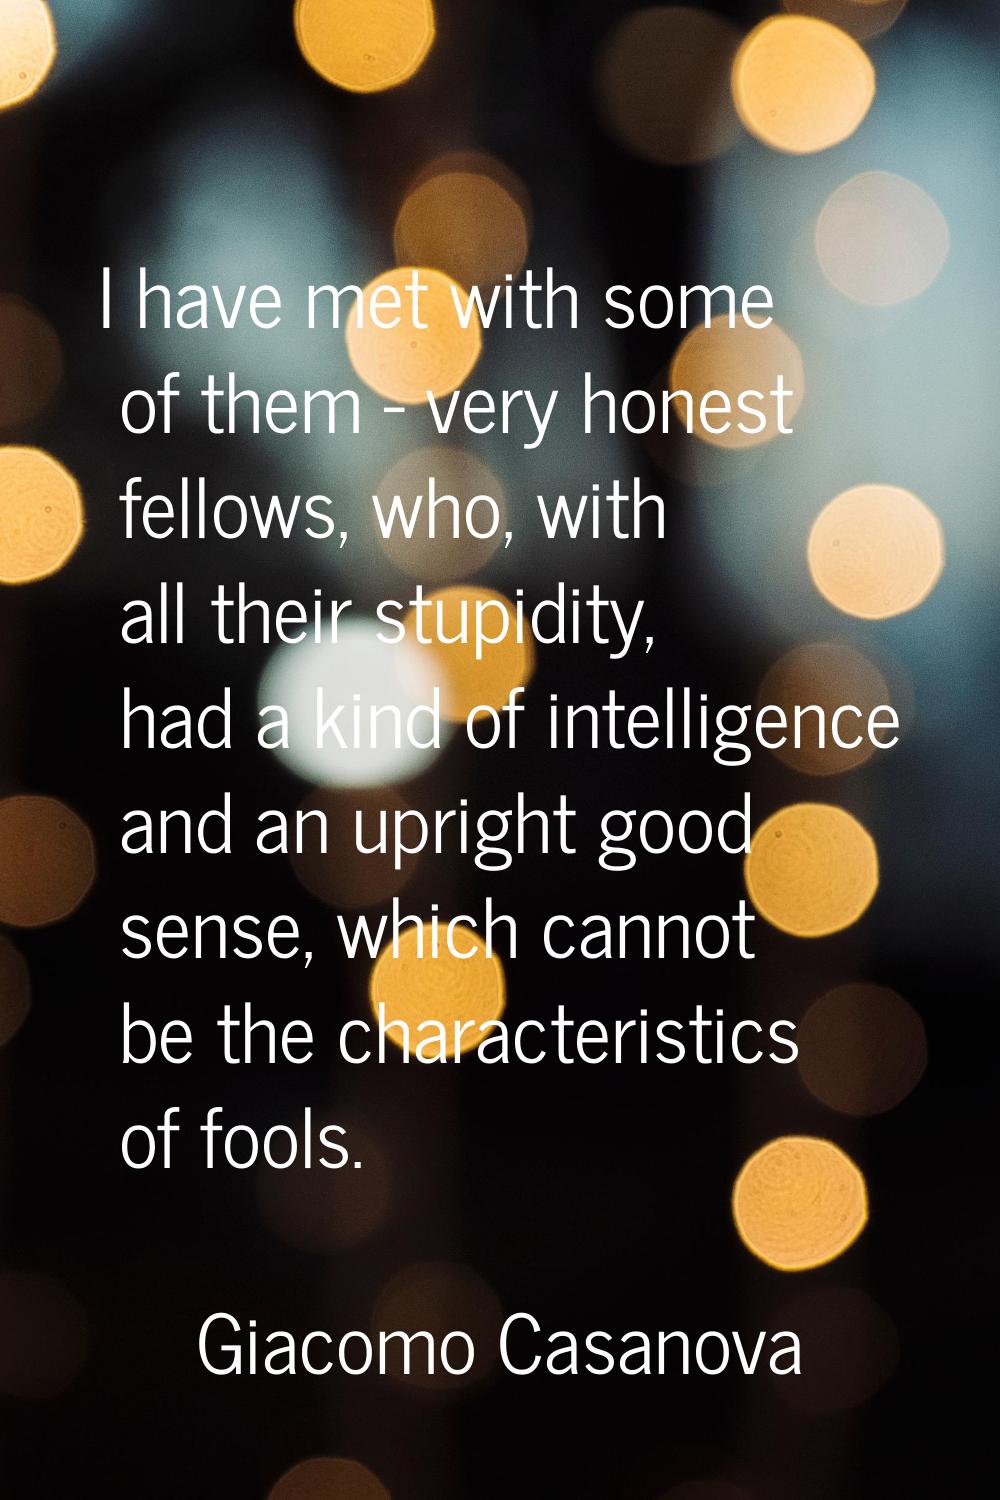 I have met with some of them - very honest fellows, who, with all their stupidity, had a kind of in